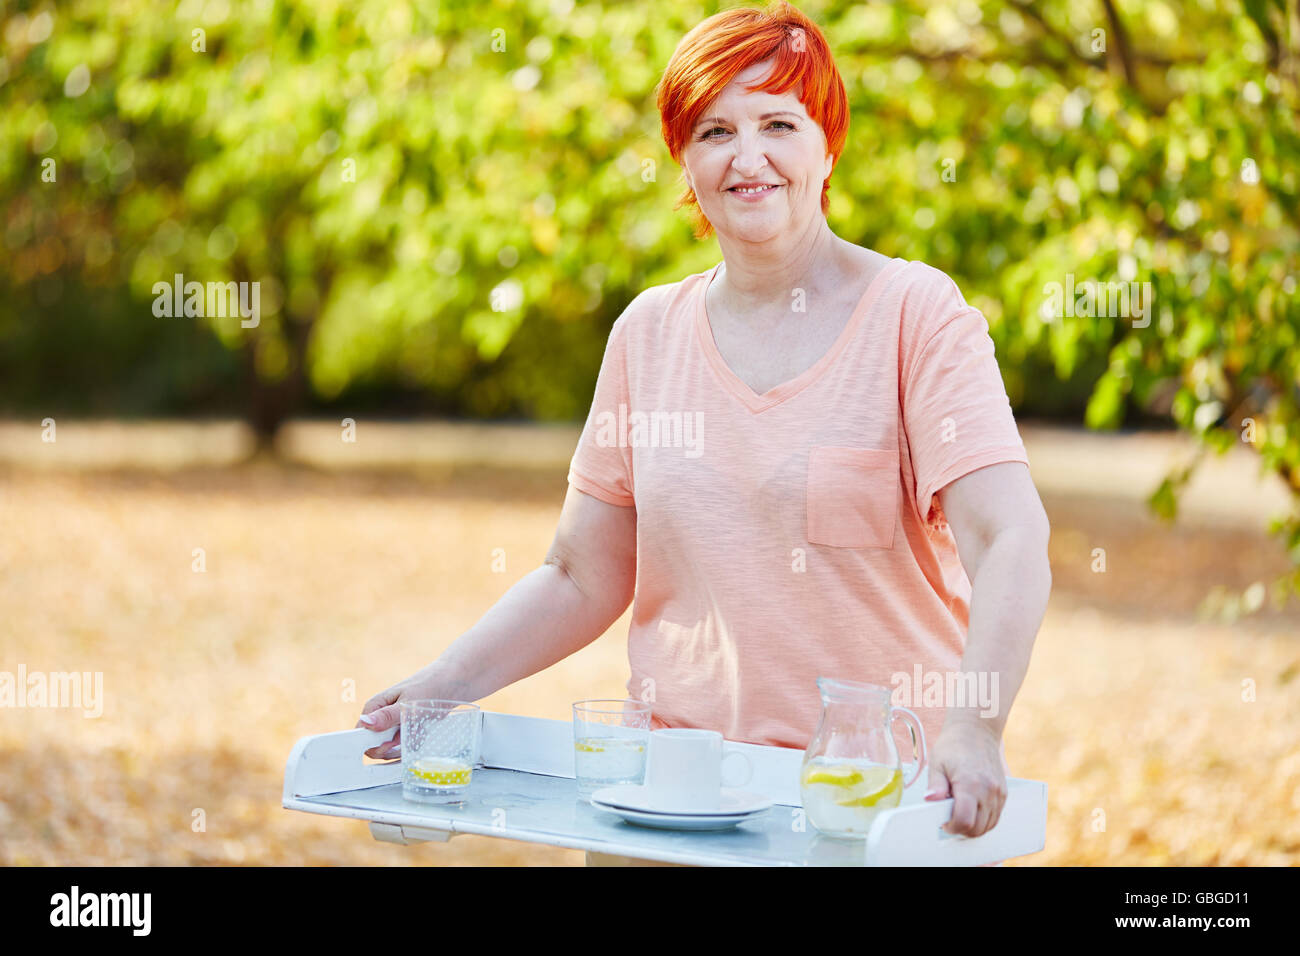 Woman holding refreshment drinks on a tablet during her summer vacations Stock Photo